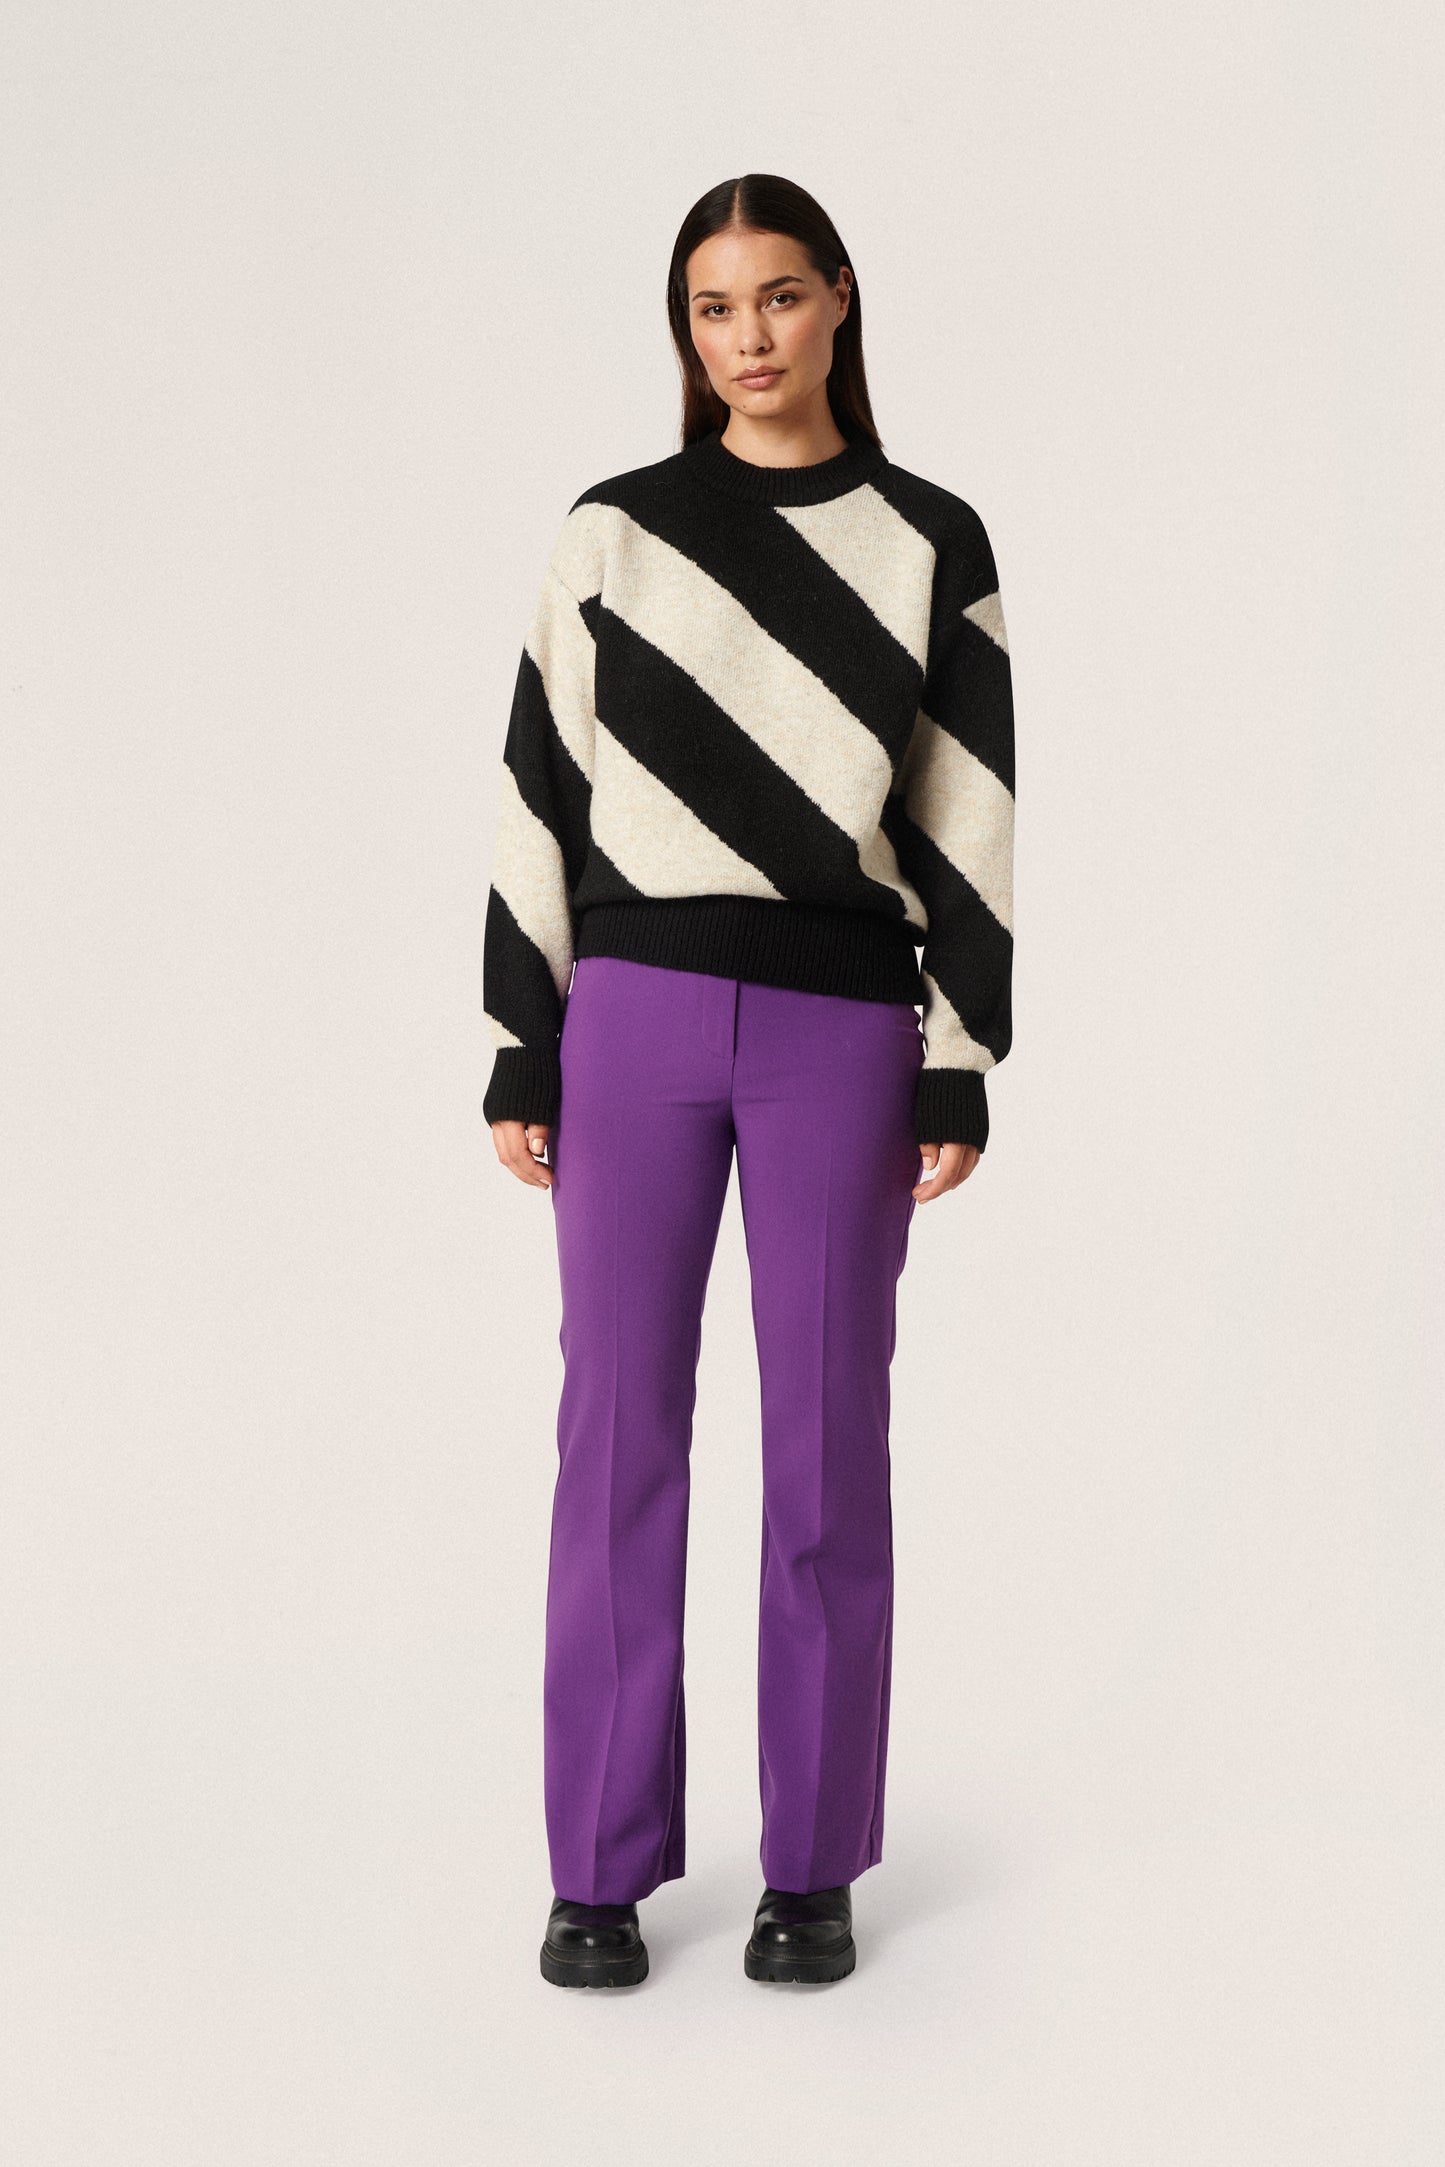 Soaked in Luxury Dio Stripe Pullover Knit Sandshell Diagonal Stripe